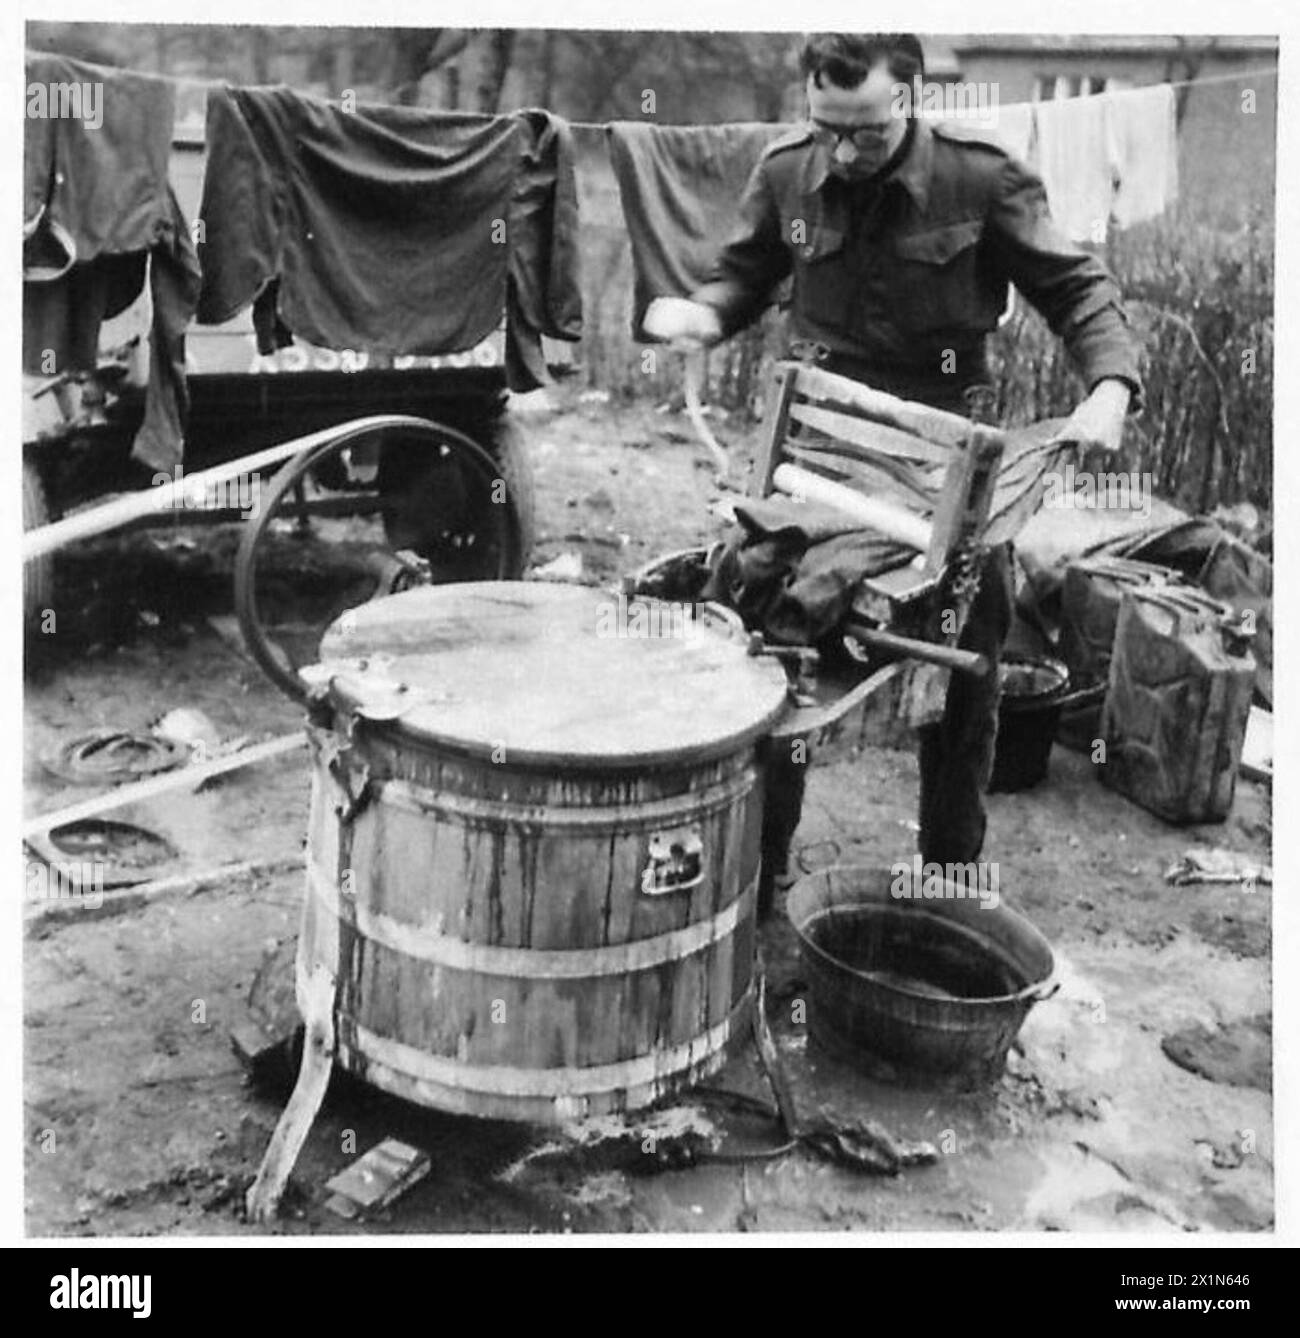 WASH DAY IN THE LINE ON GERMAN SOIL - The washing is finished in quick time and without effort and is not hung out to dry, British Army, 21st Army Group Stock Photo